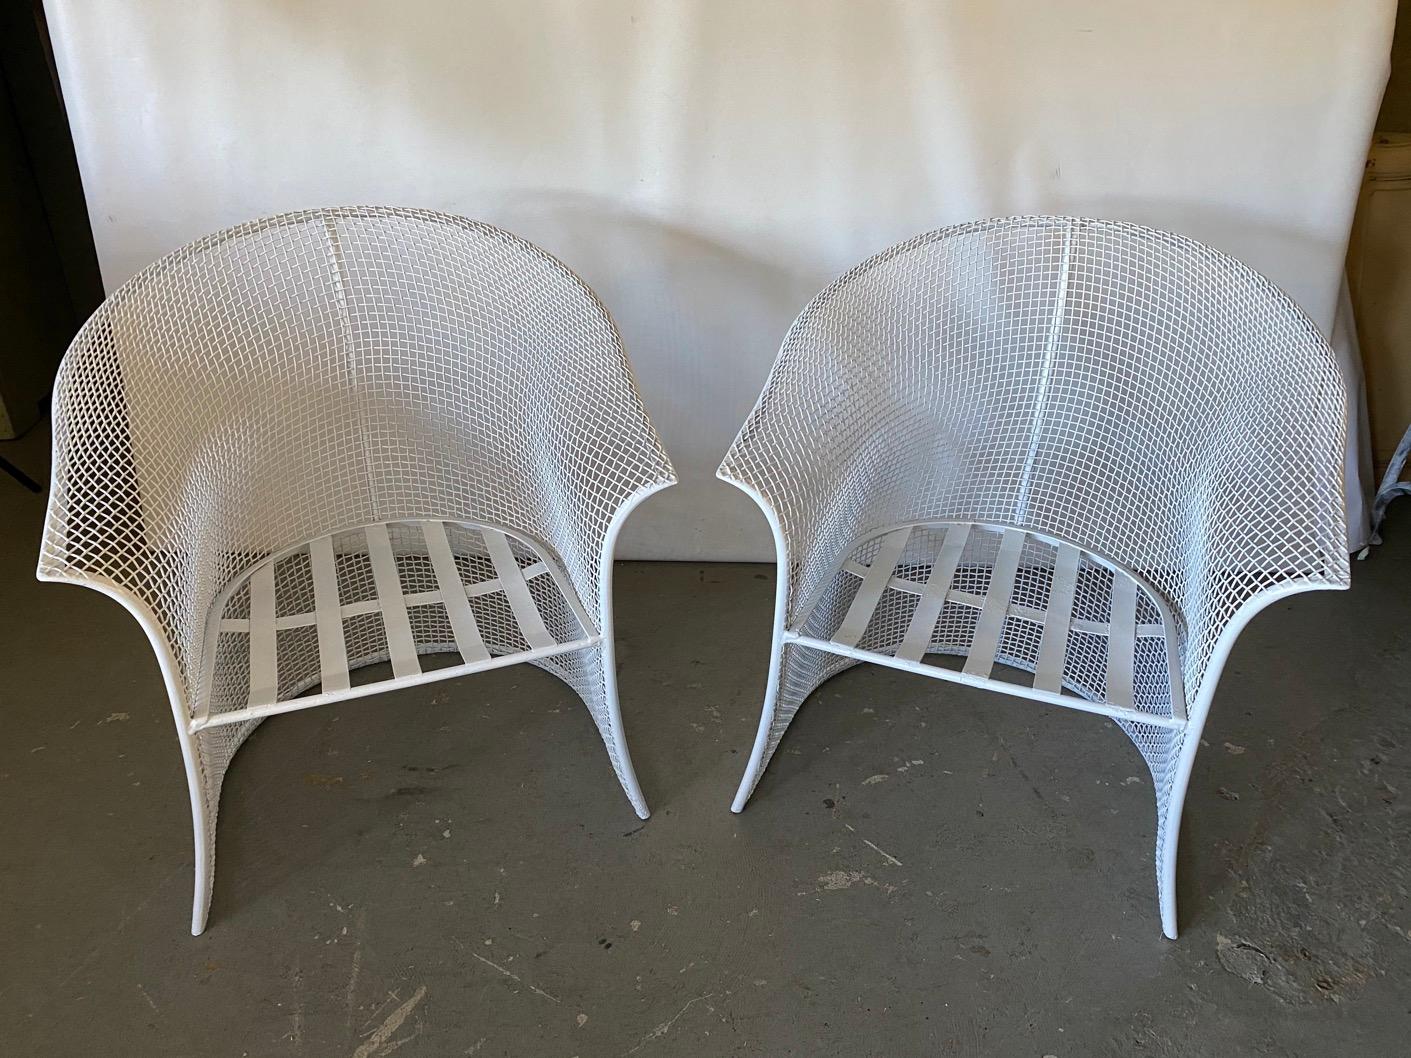 Pair of wonderfully stylish Russell Woodard style mesh wire arm chairs with rounded barrel back and arms. Metal mesh body rests on wrought iron legs. Suitable for indoor, outdoor, garden, patio or porch use.